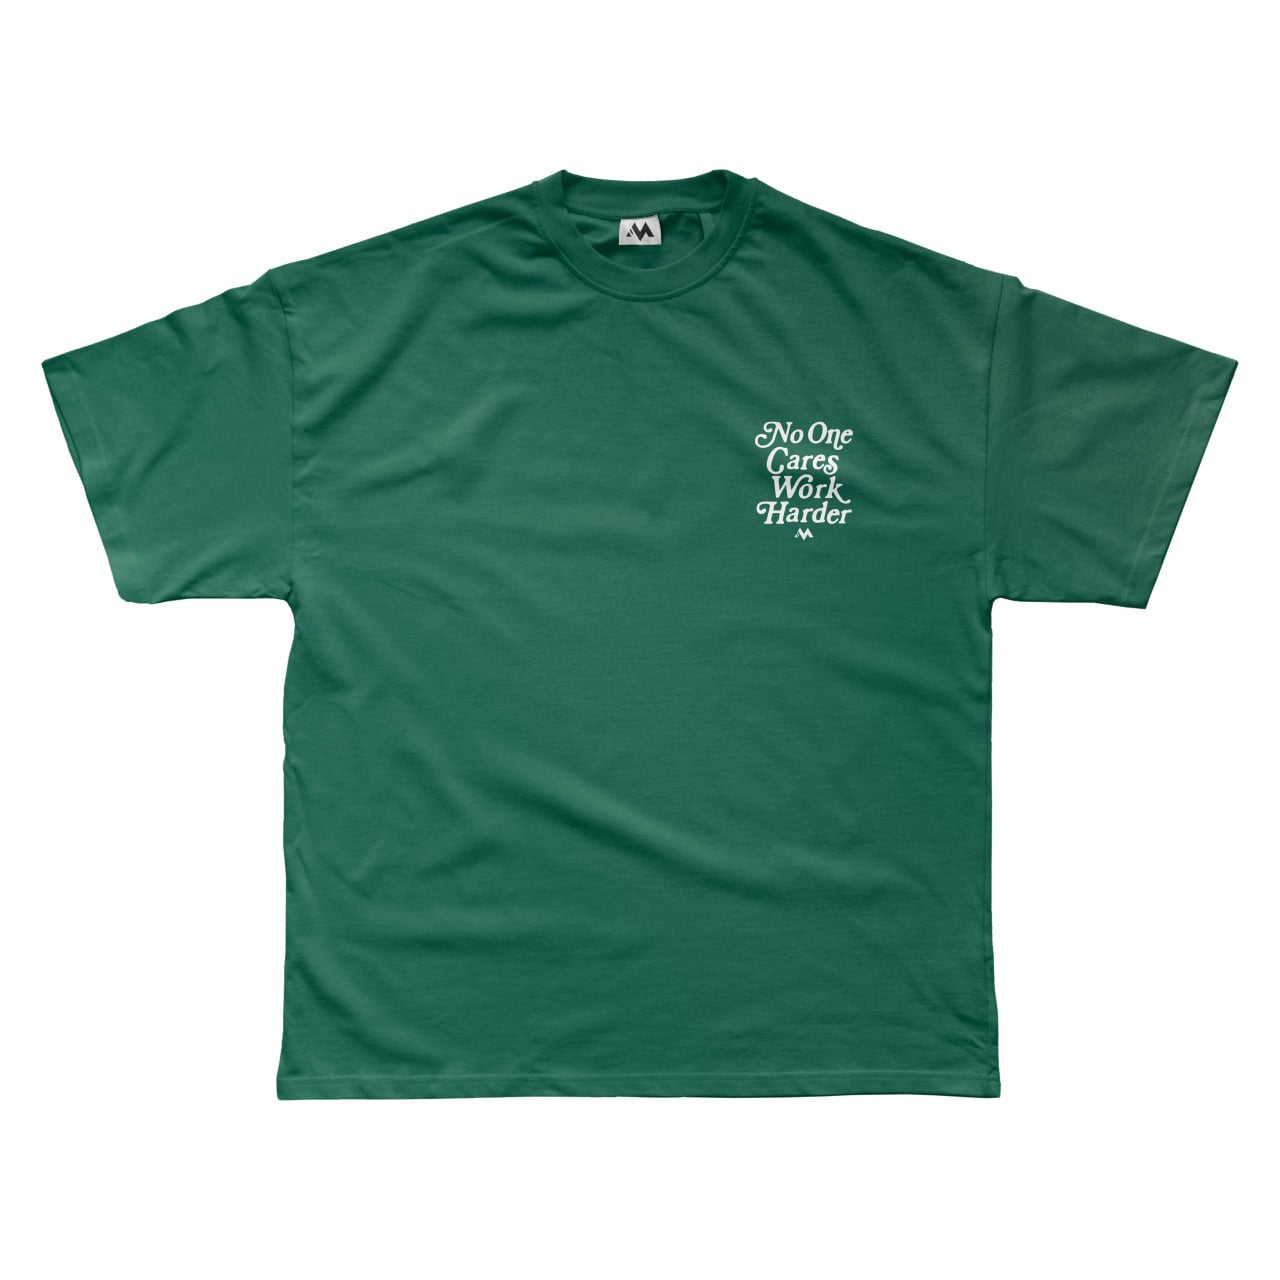 'NO ONE CARES WORK HARDER' TEE - GREEN